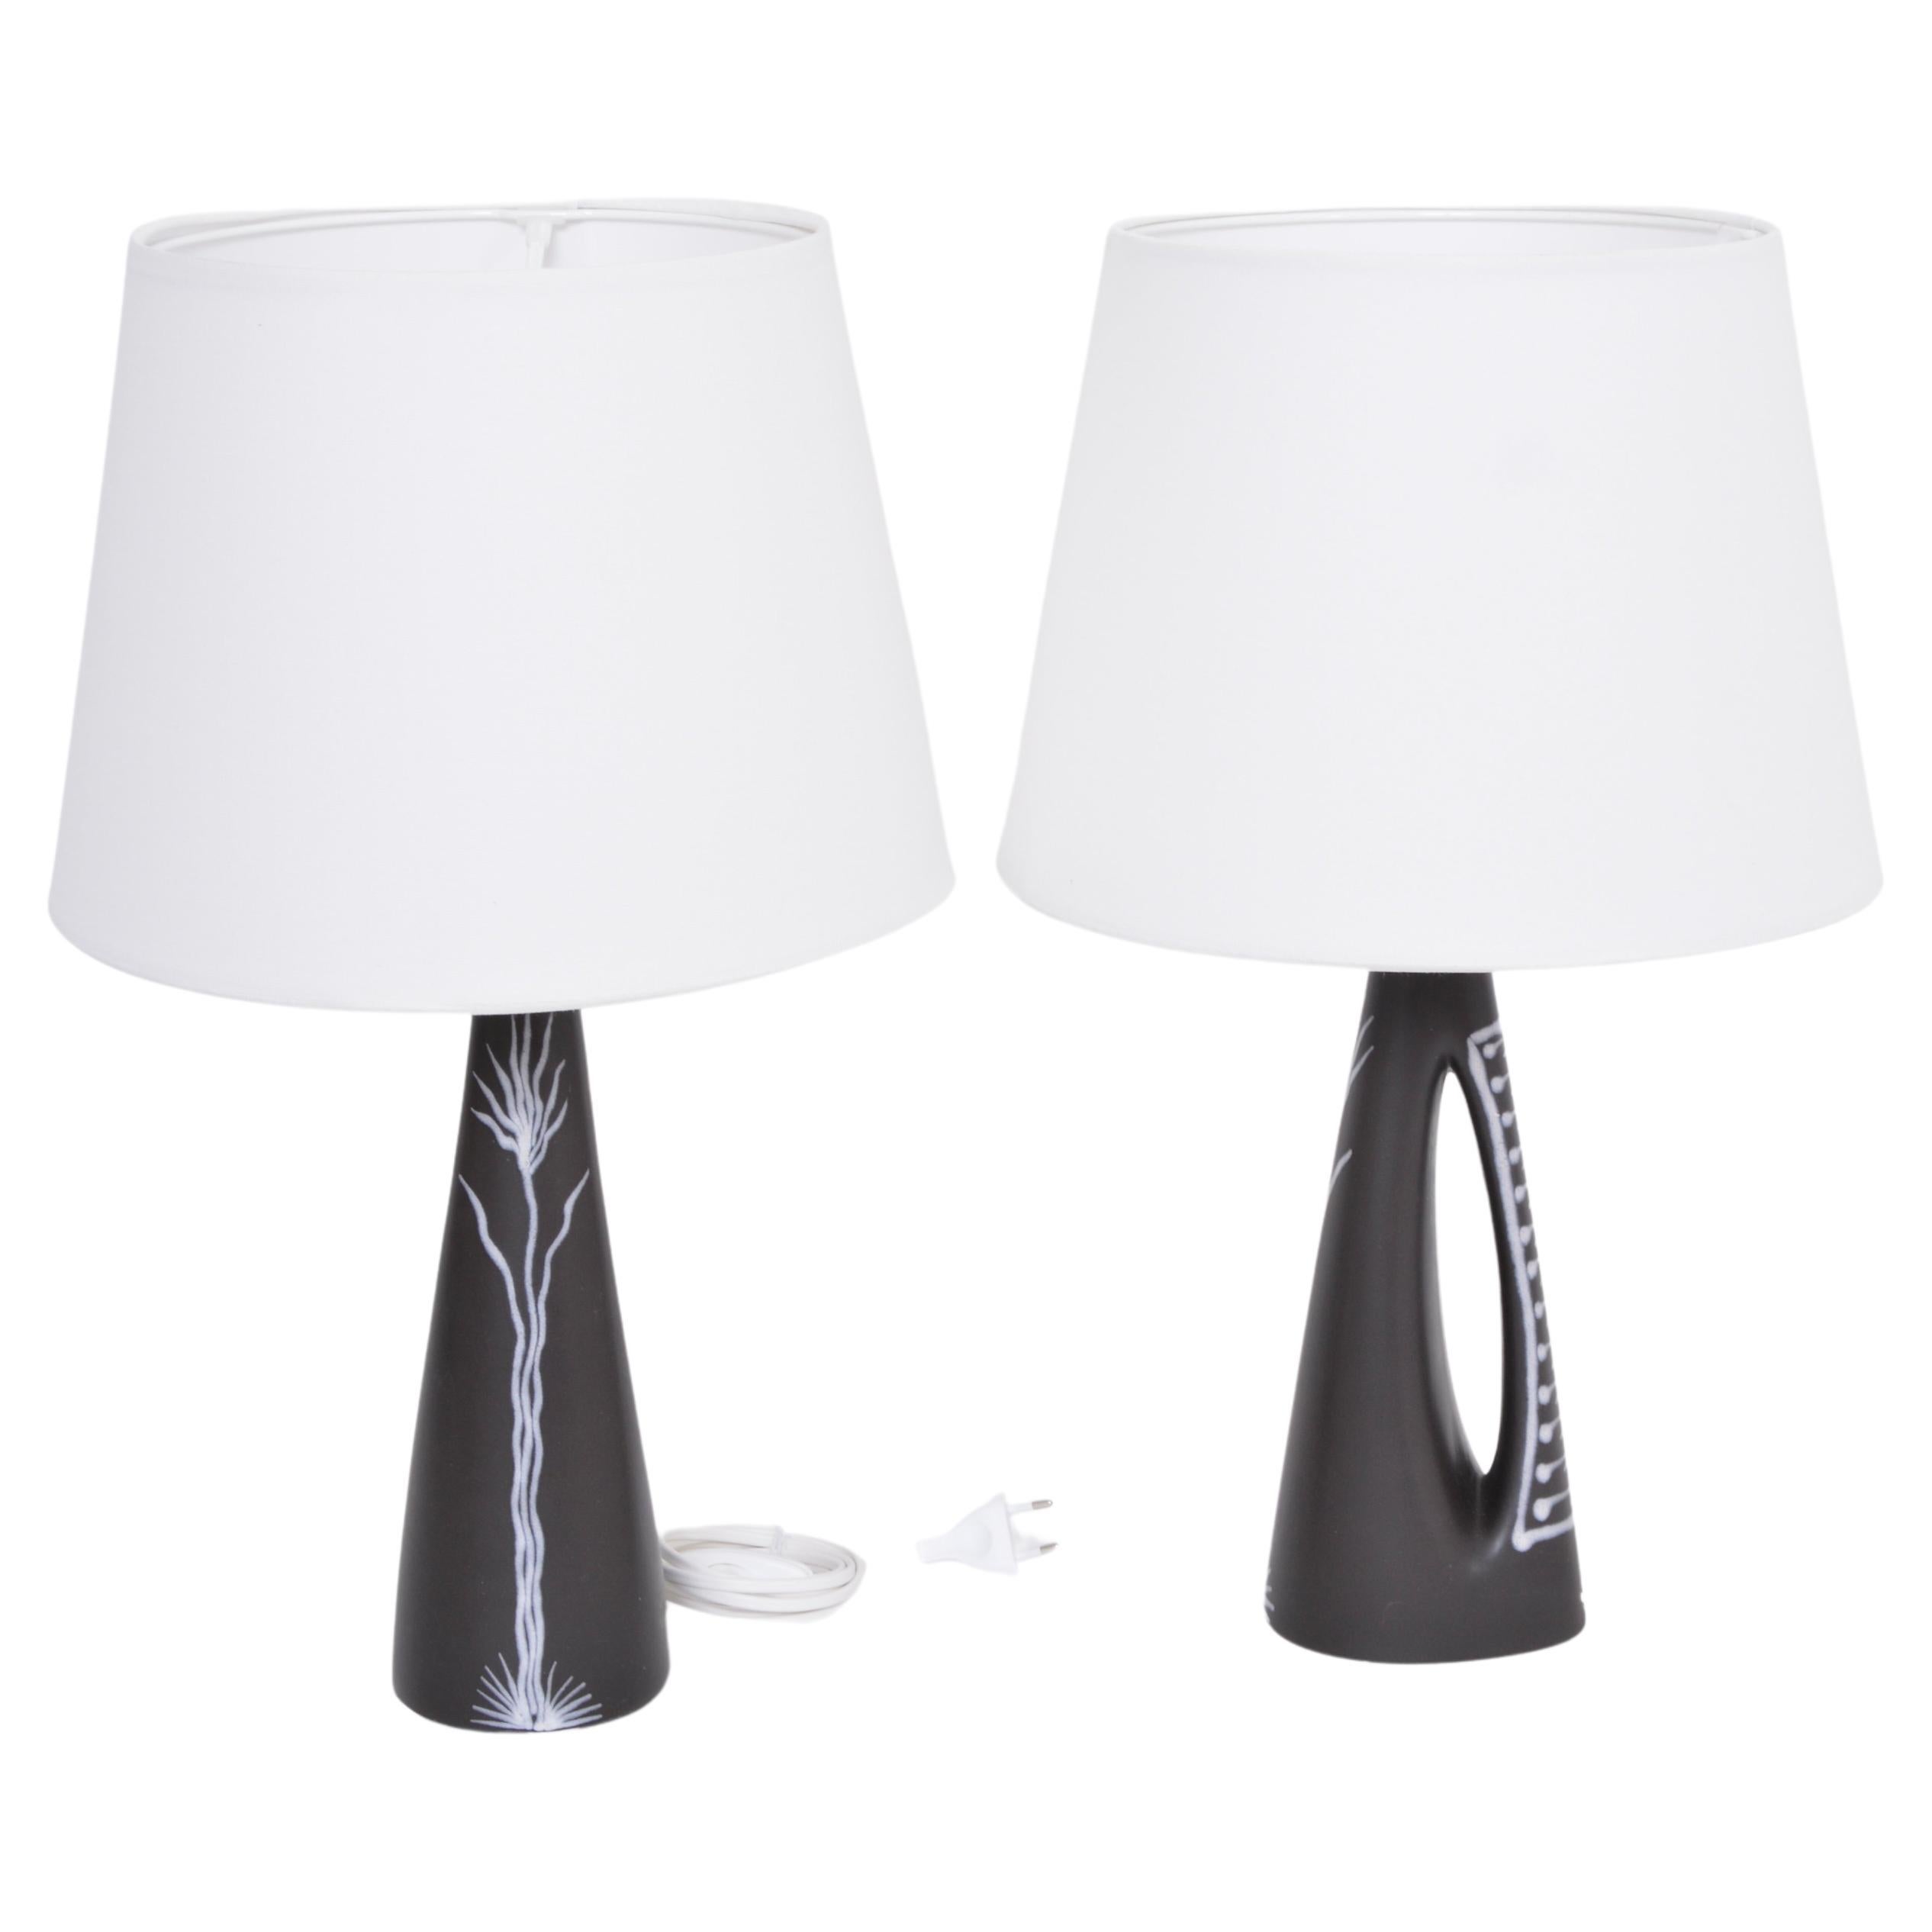 Pair of Black Danish Midcentury Ceramic Table Lamps by Holm Sorensen for Søholm